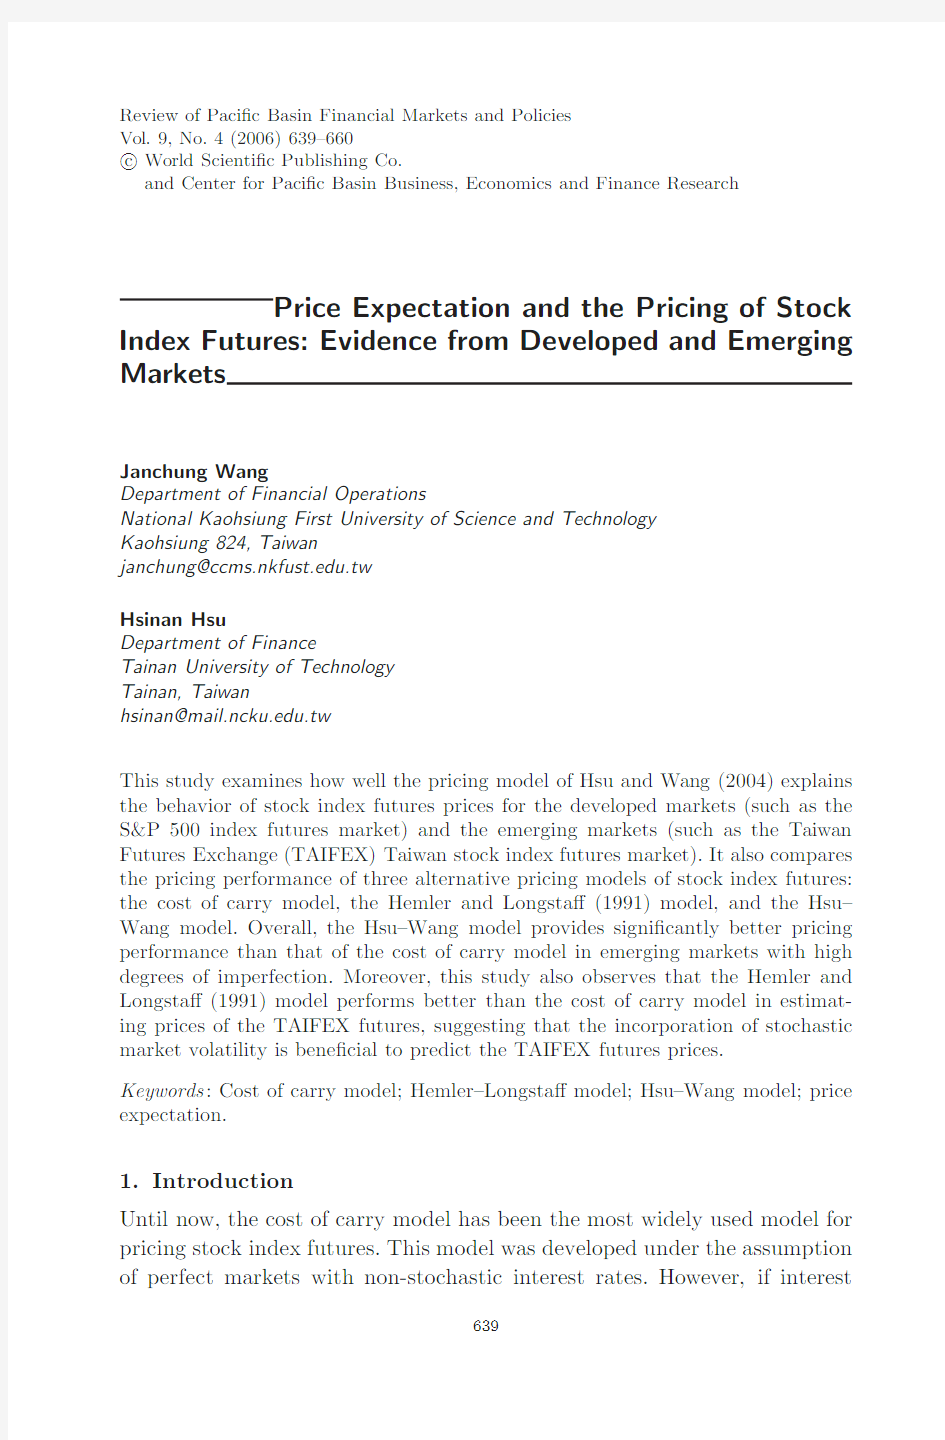 Price Expectation and the Pricing of Stock Evidence from Developed and Emerging